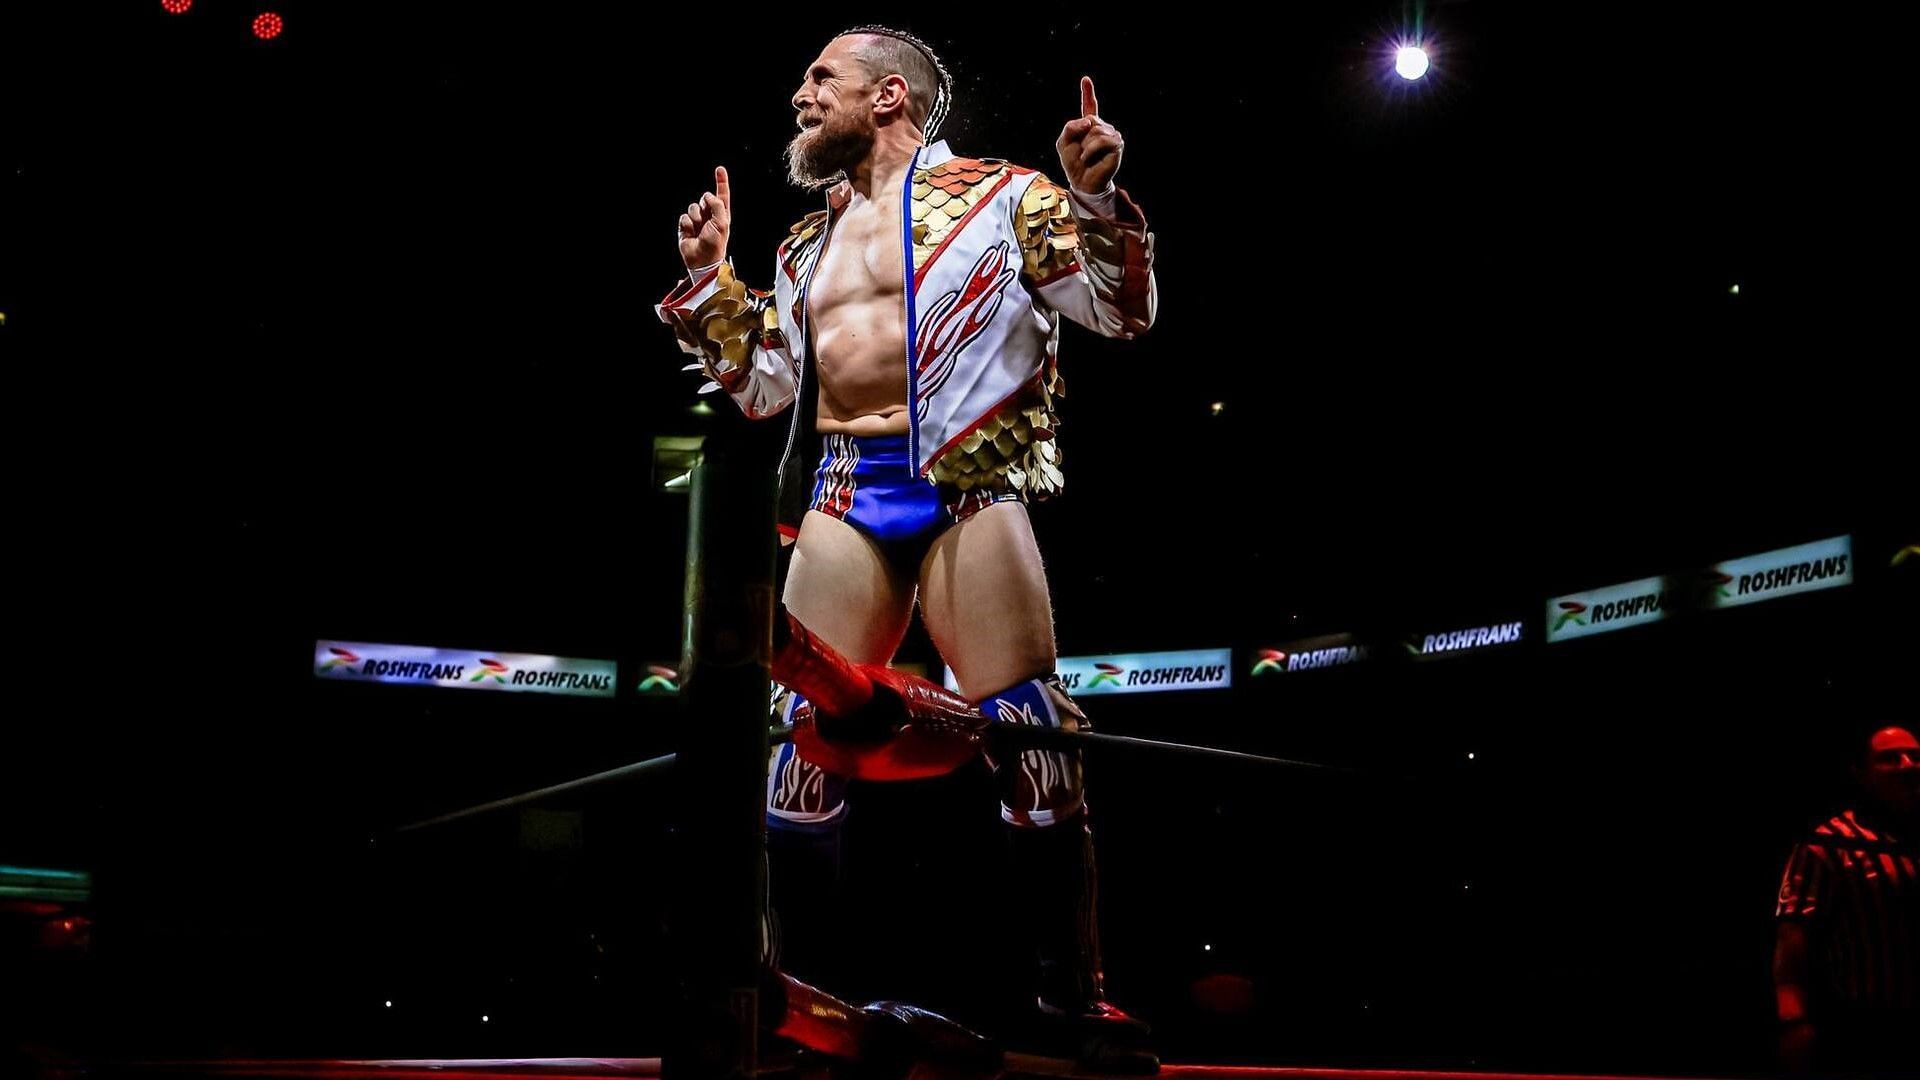 Bryan Danielson poses for fans at CMLL event in Mexico